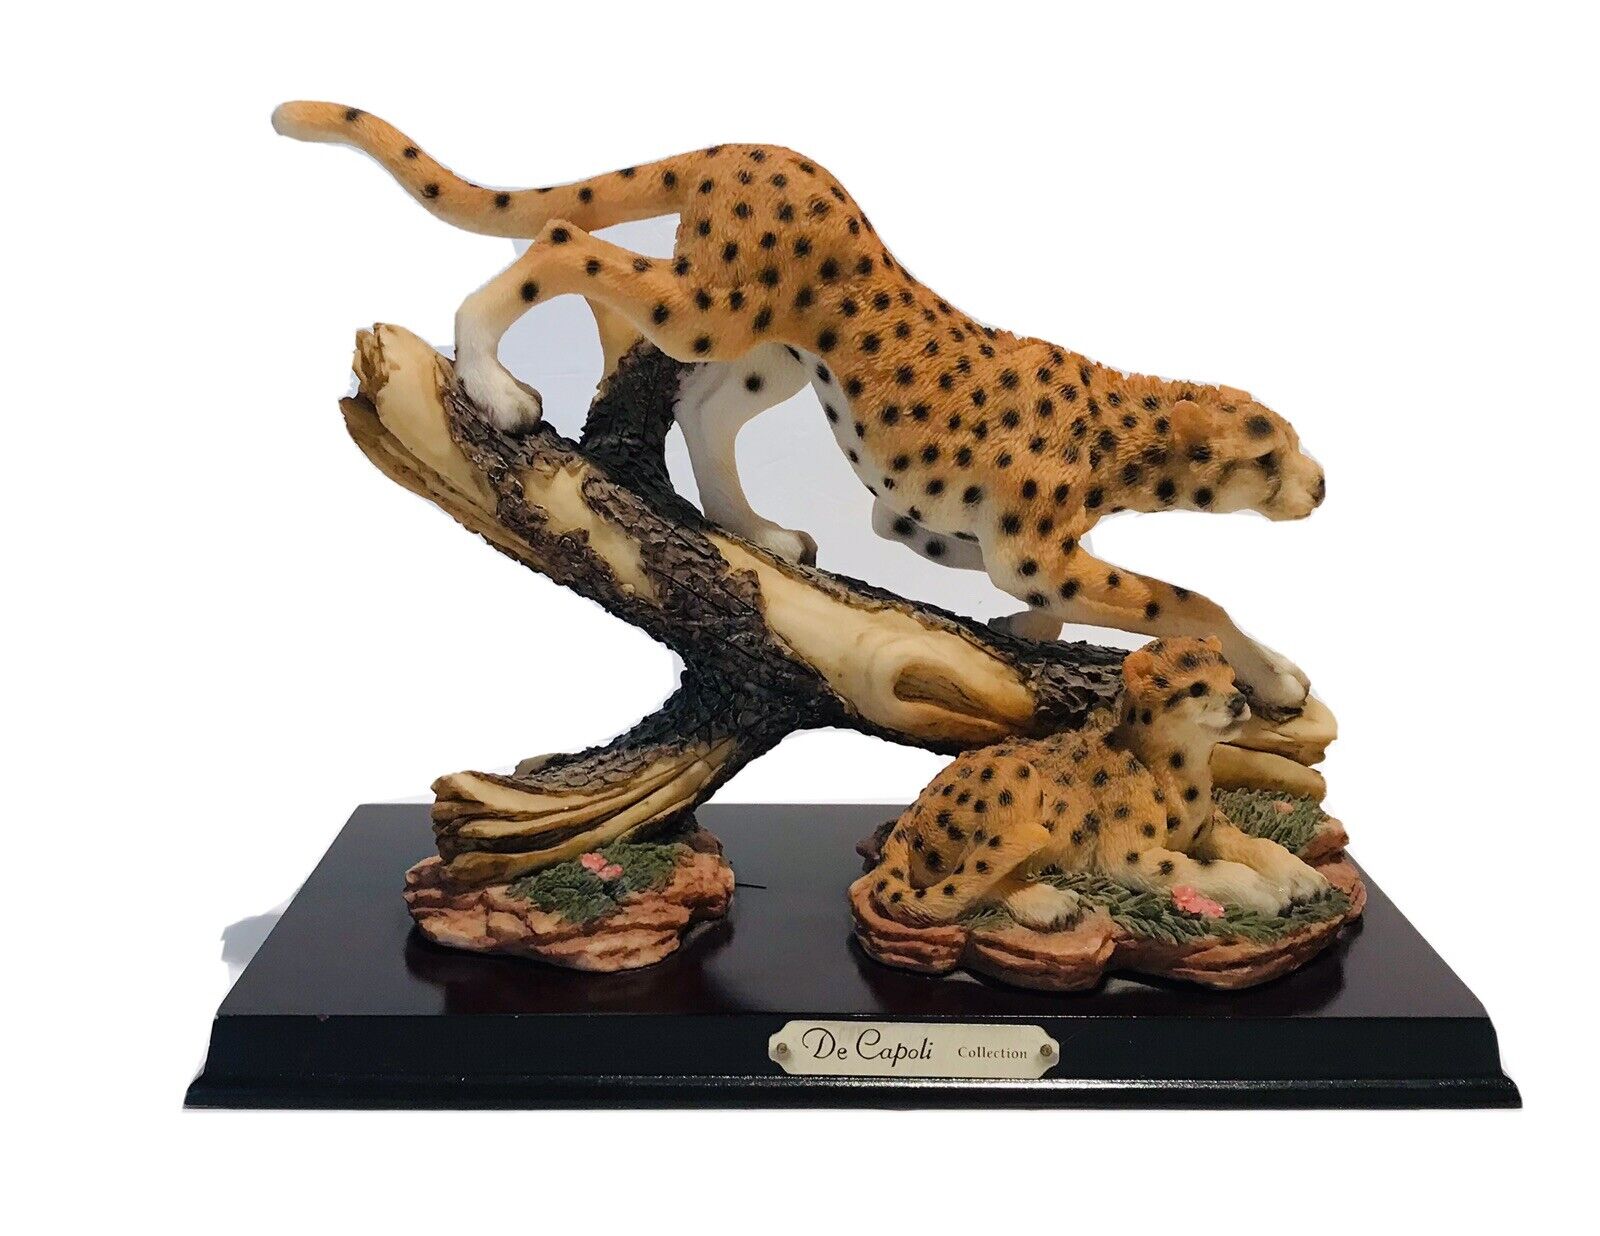 De Capoli Collection Leopard Statue Figurine 13”x9”x6” With Wooden Base